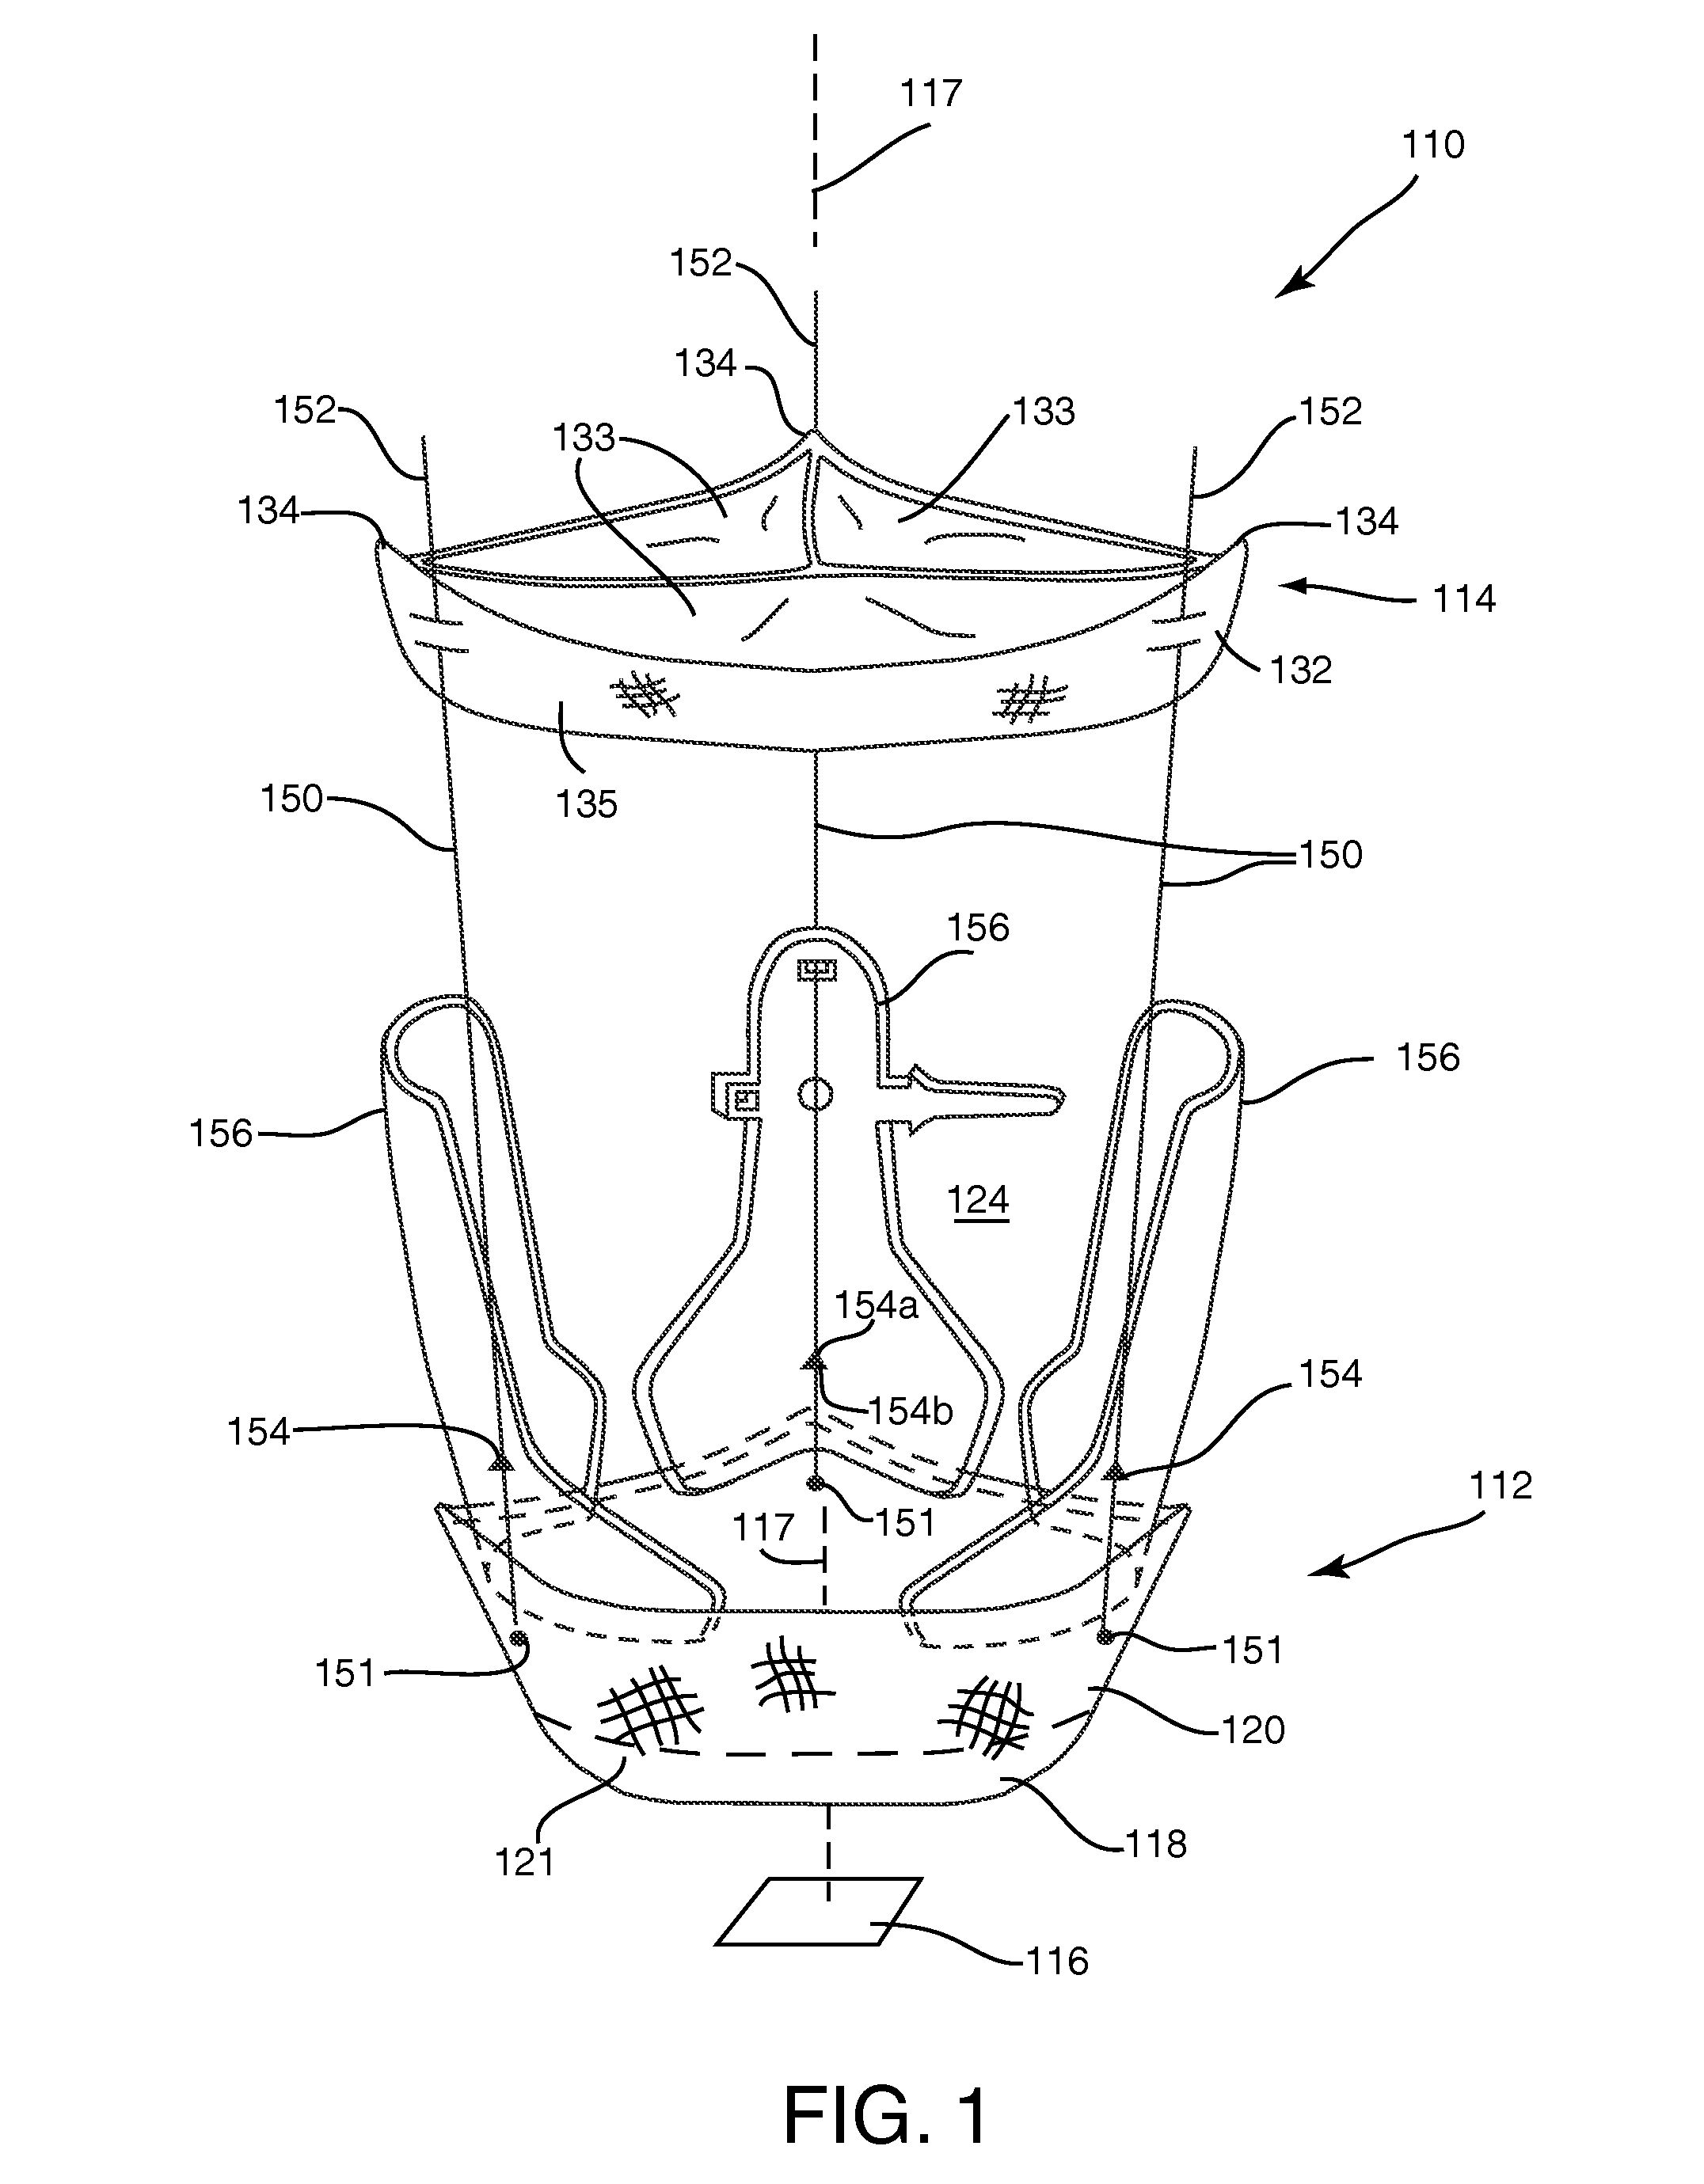 Guide shields for multiple component prosthetic heart valve assemblies and apparatus and methods for using them